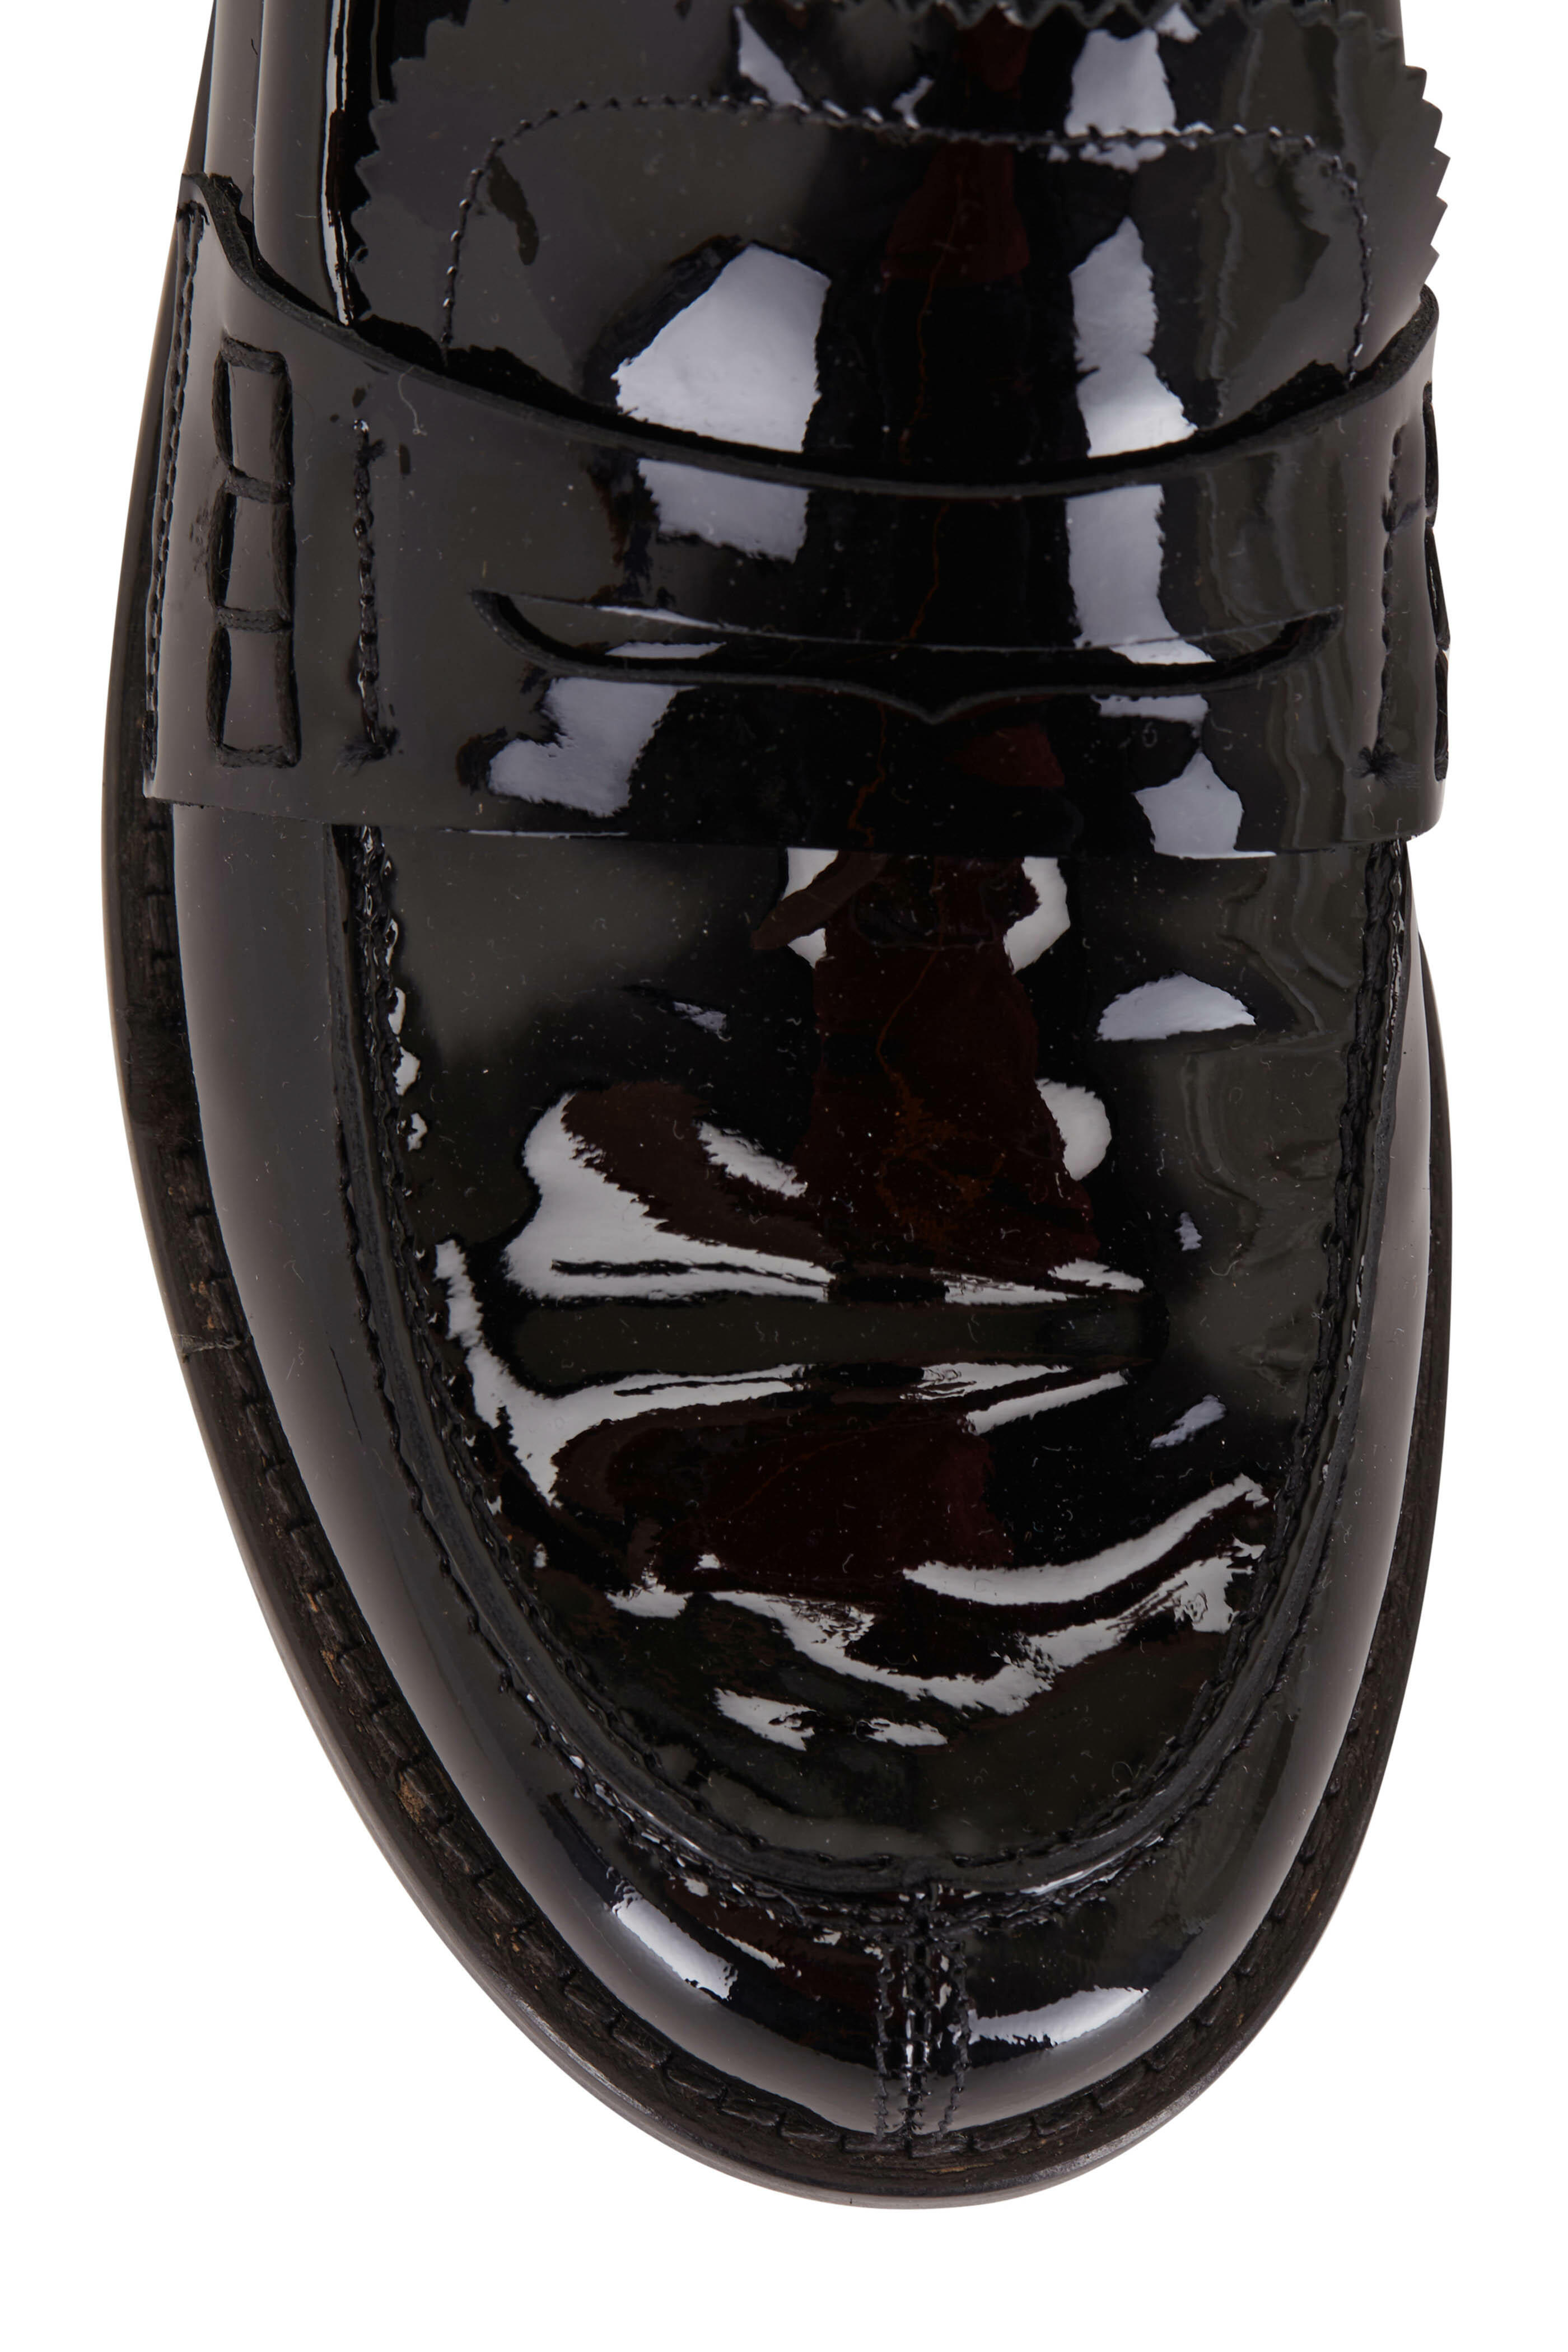 Jerry loafer in black patent leather